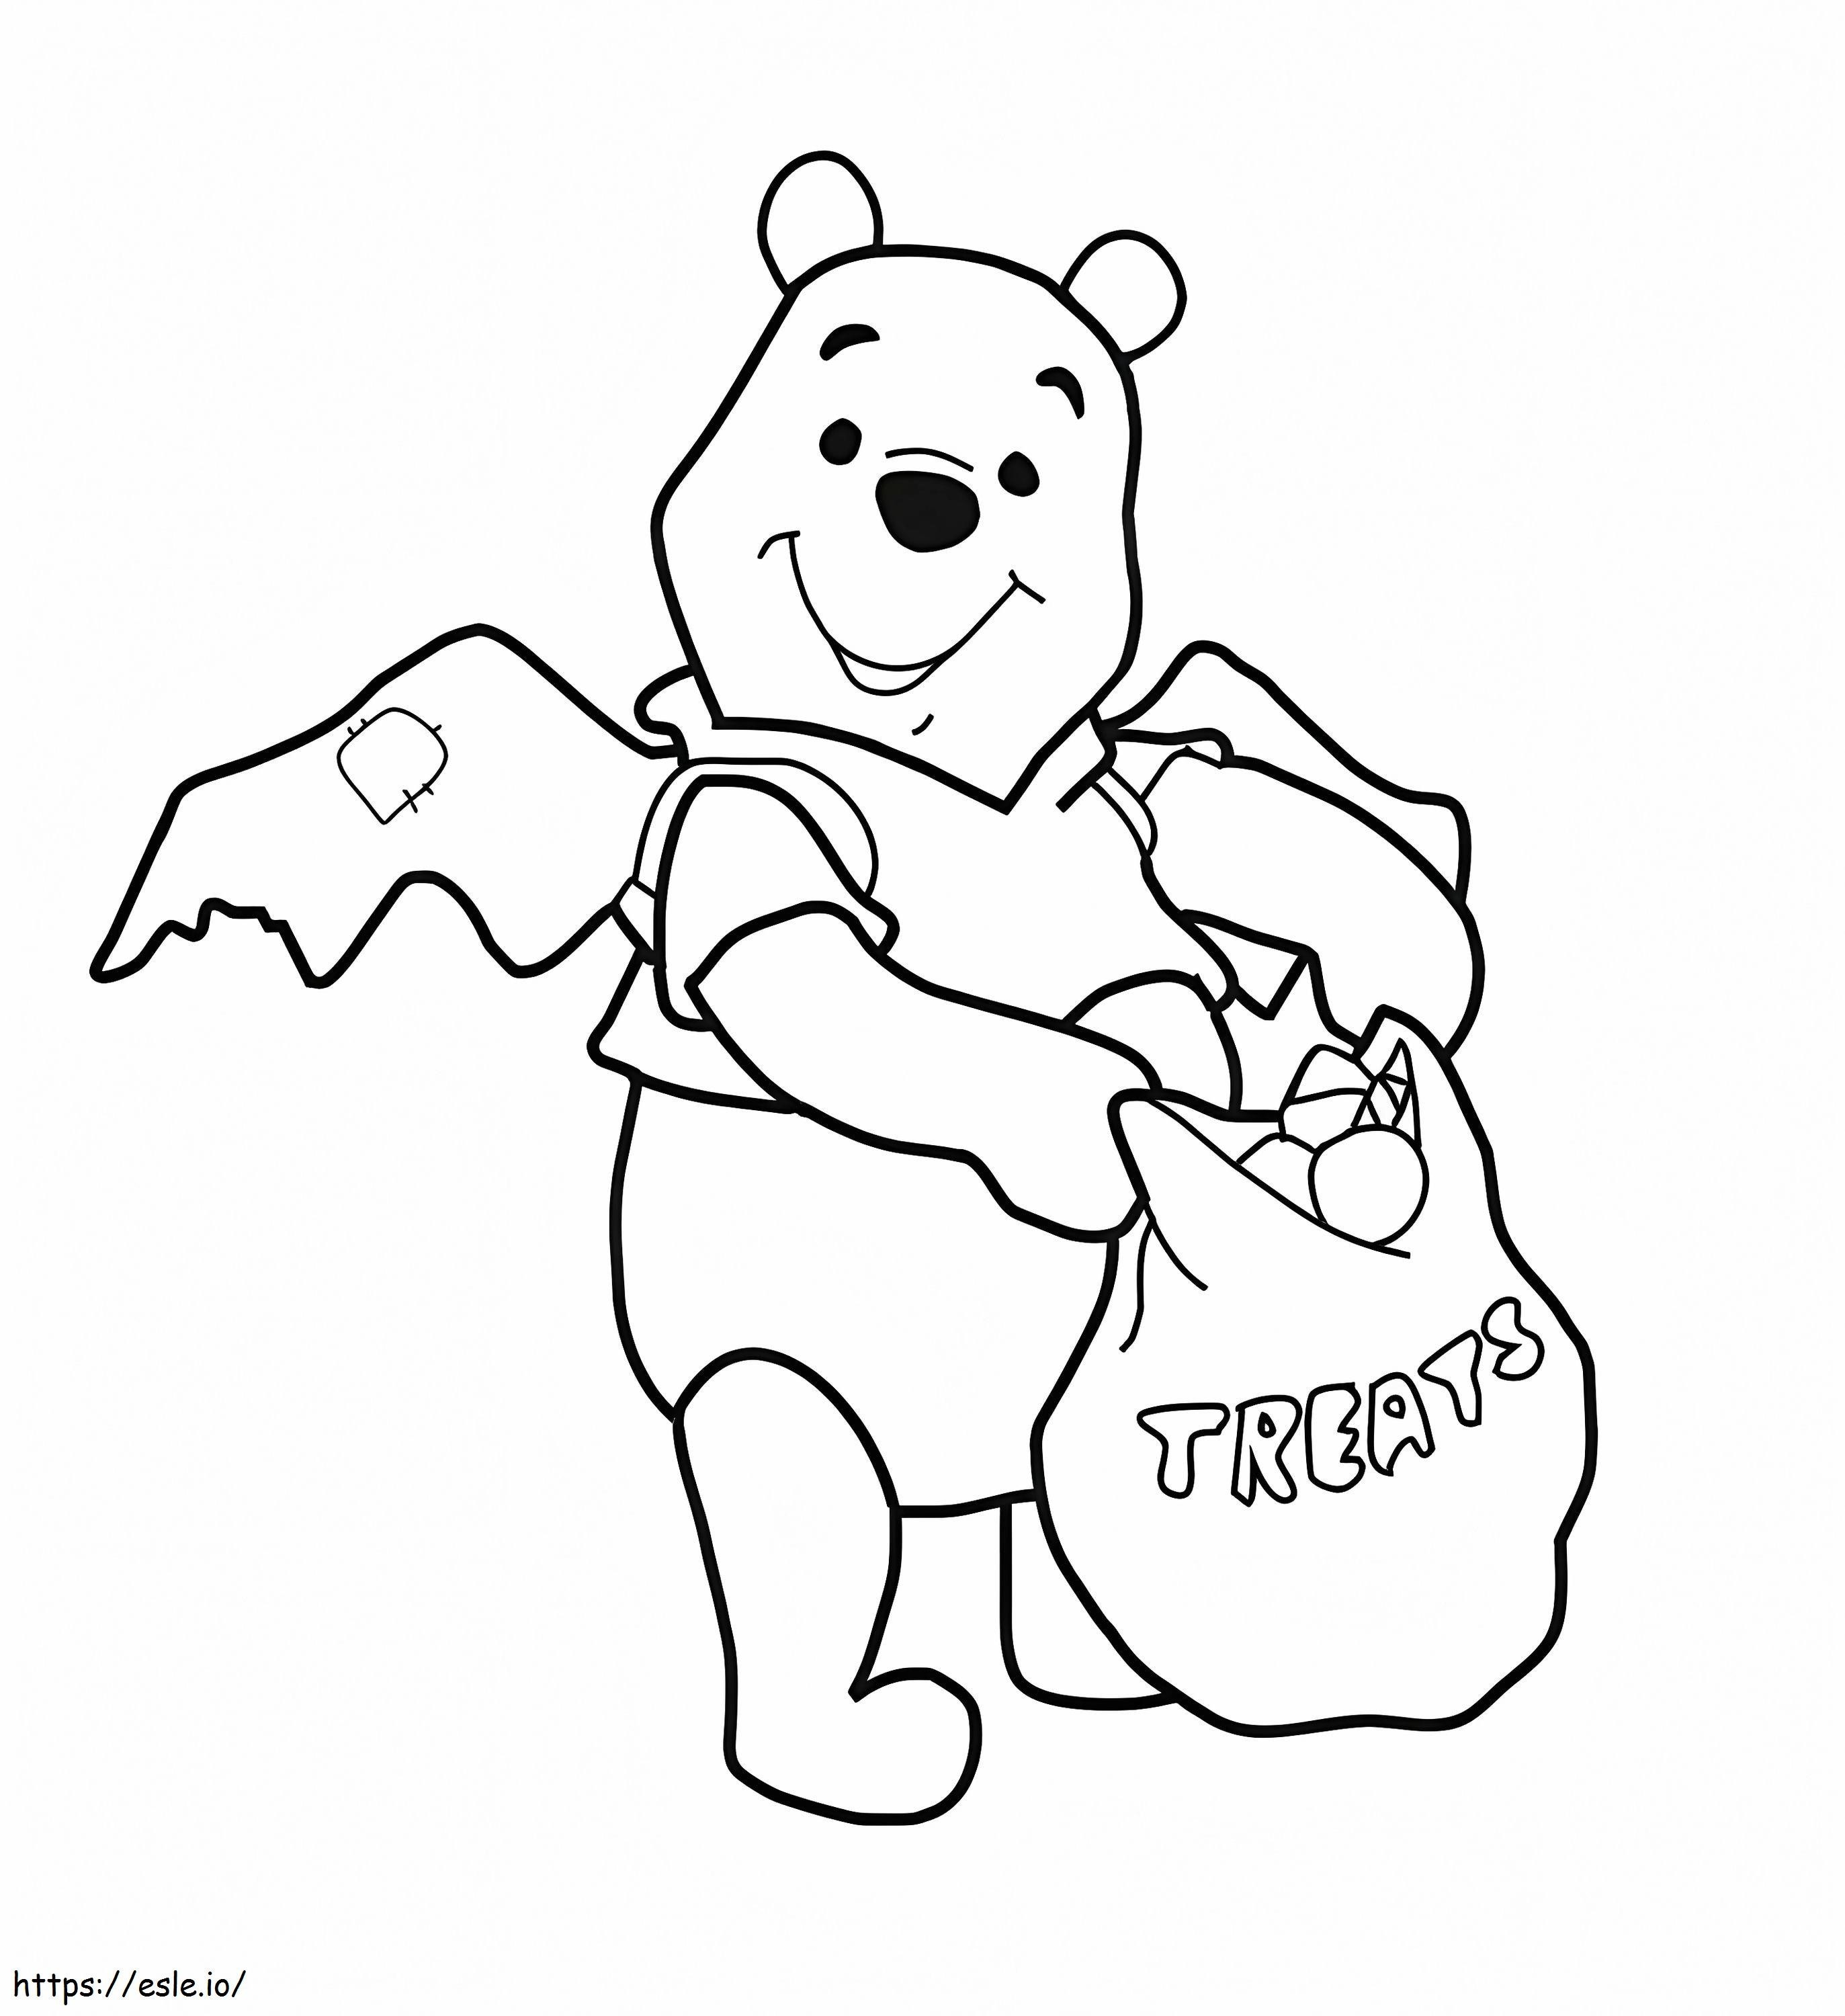 Pooh And Candy Bag coloring page